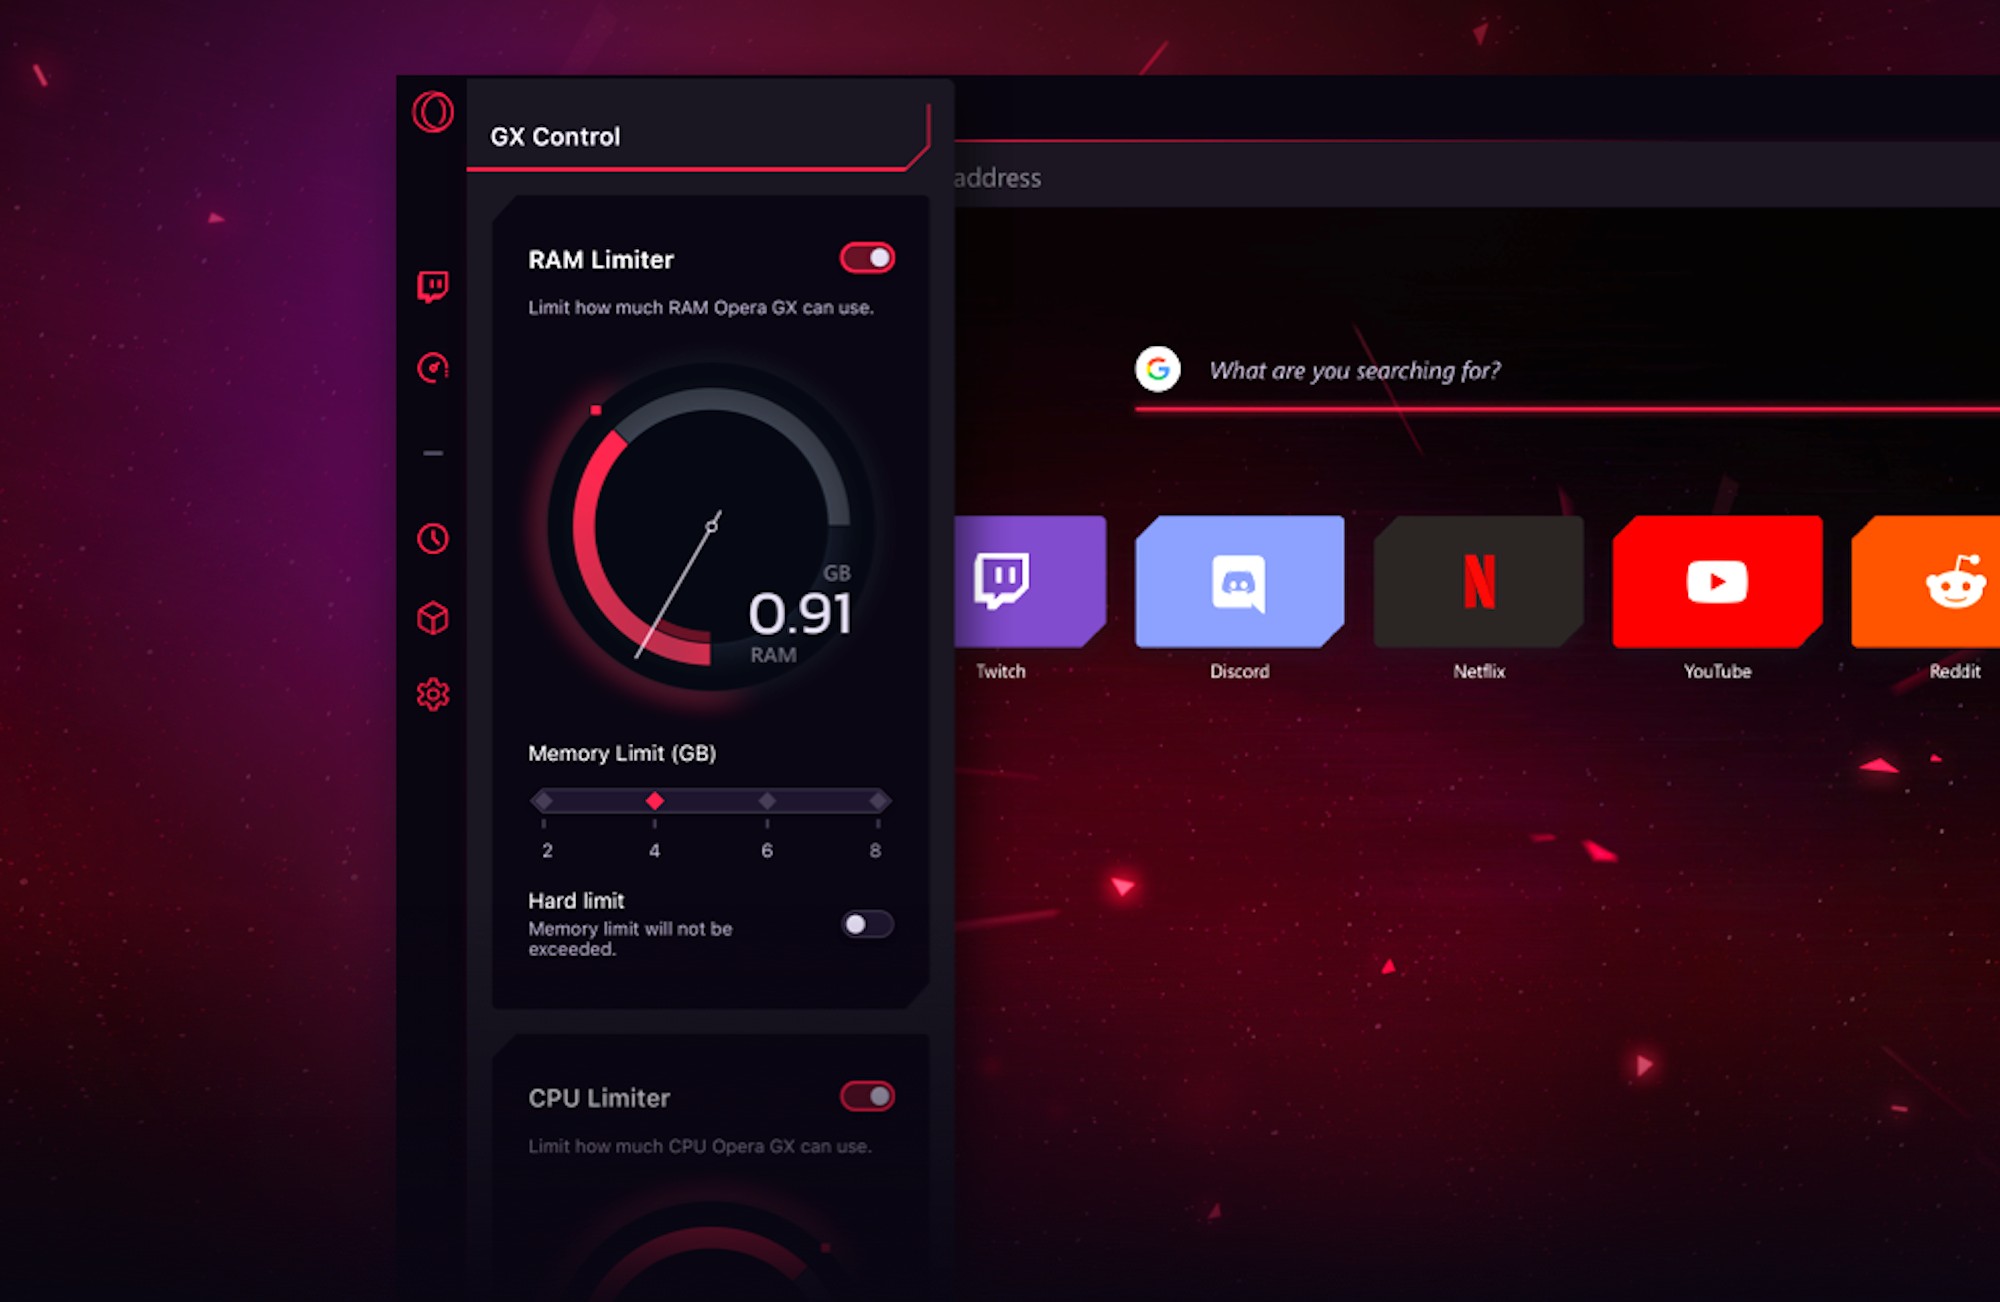 Opera's new 'gaming browser' lets you set limits on CPU and RAM usage